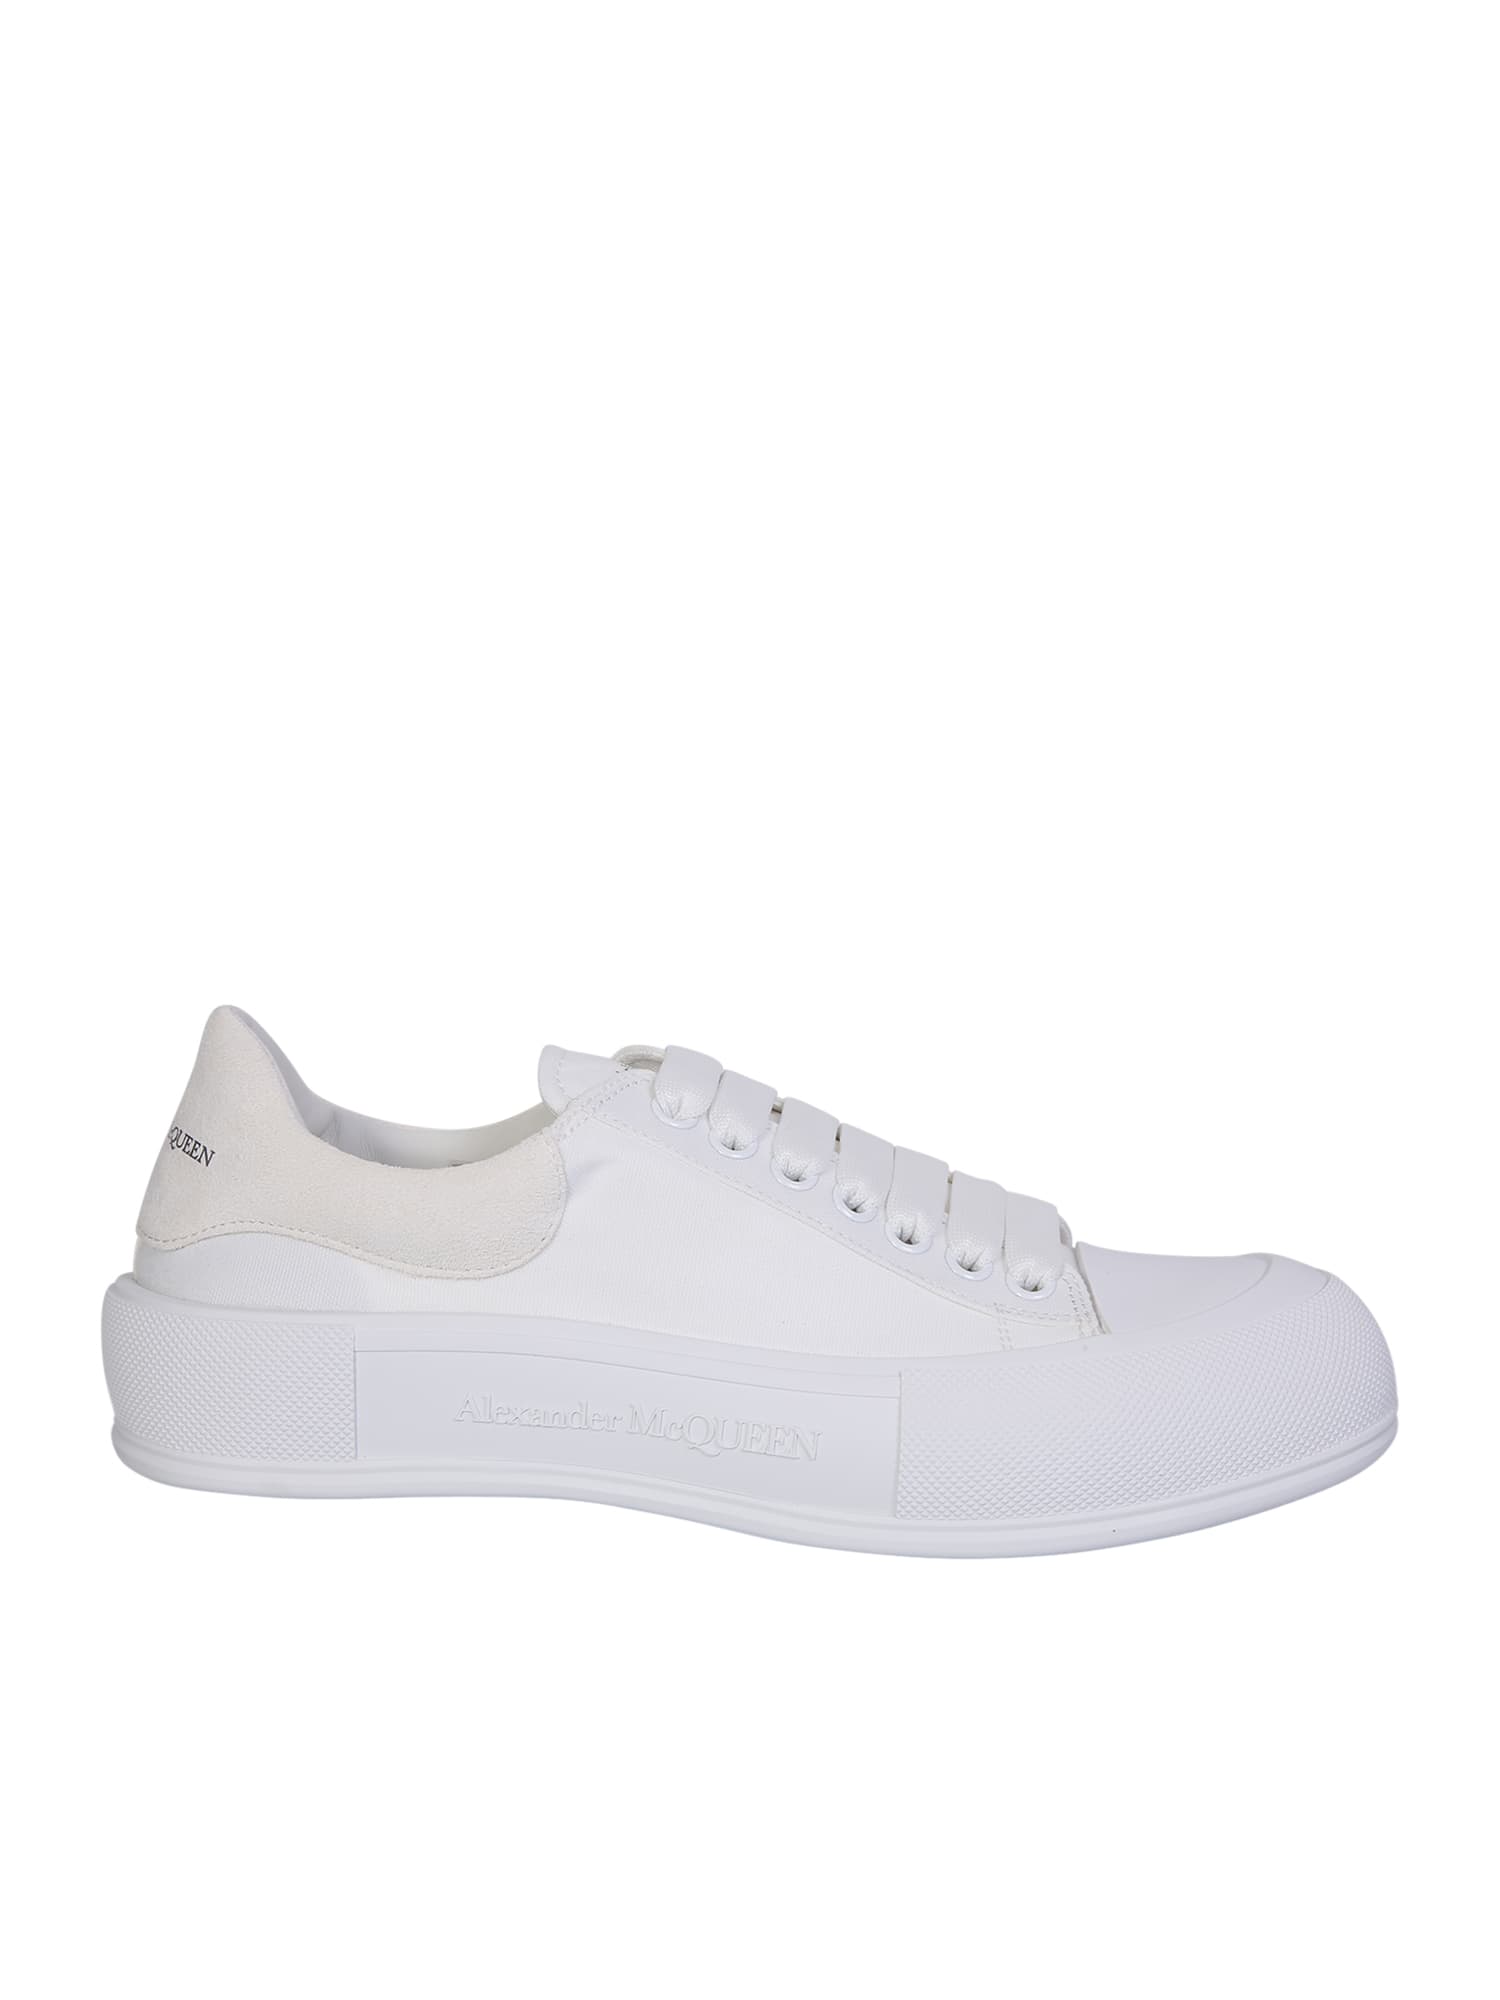 Alexander McQueen Shoes Skate Lace Up